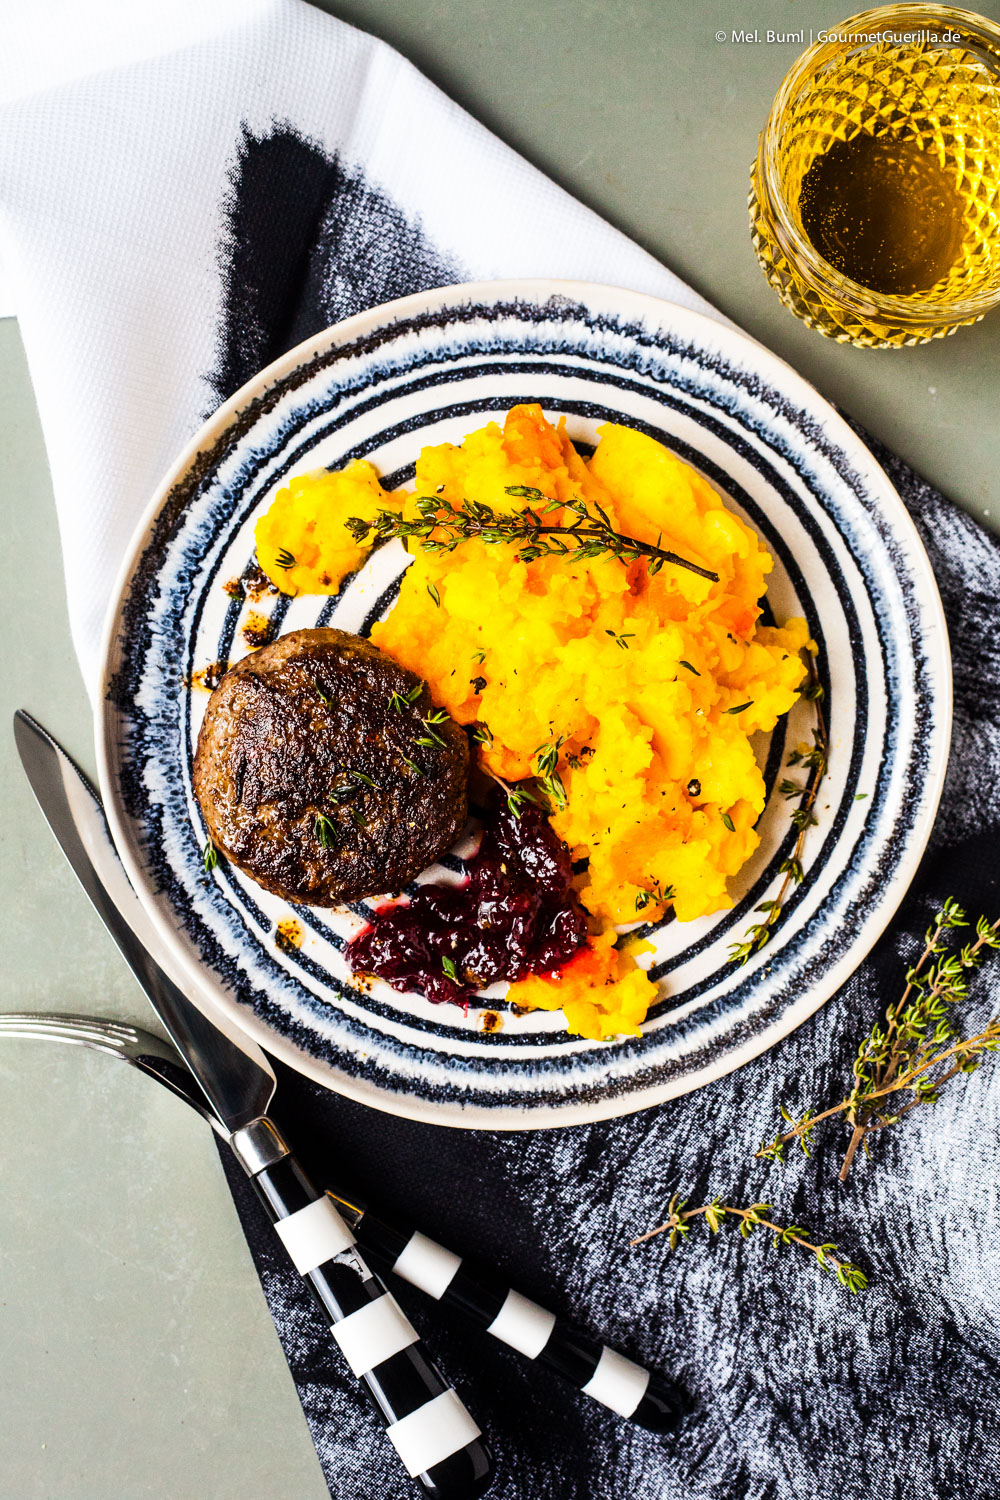 Homemade wild boar stew with pumpkin and potato mash and cranberries